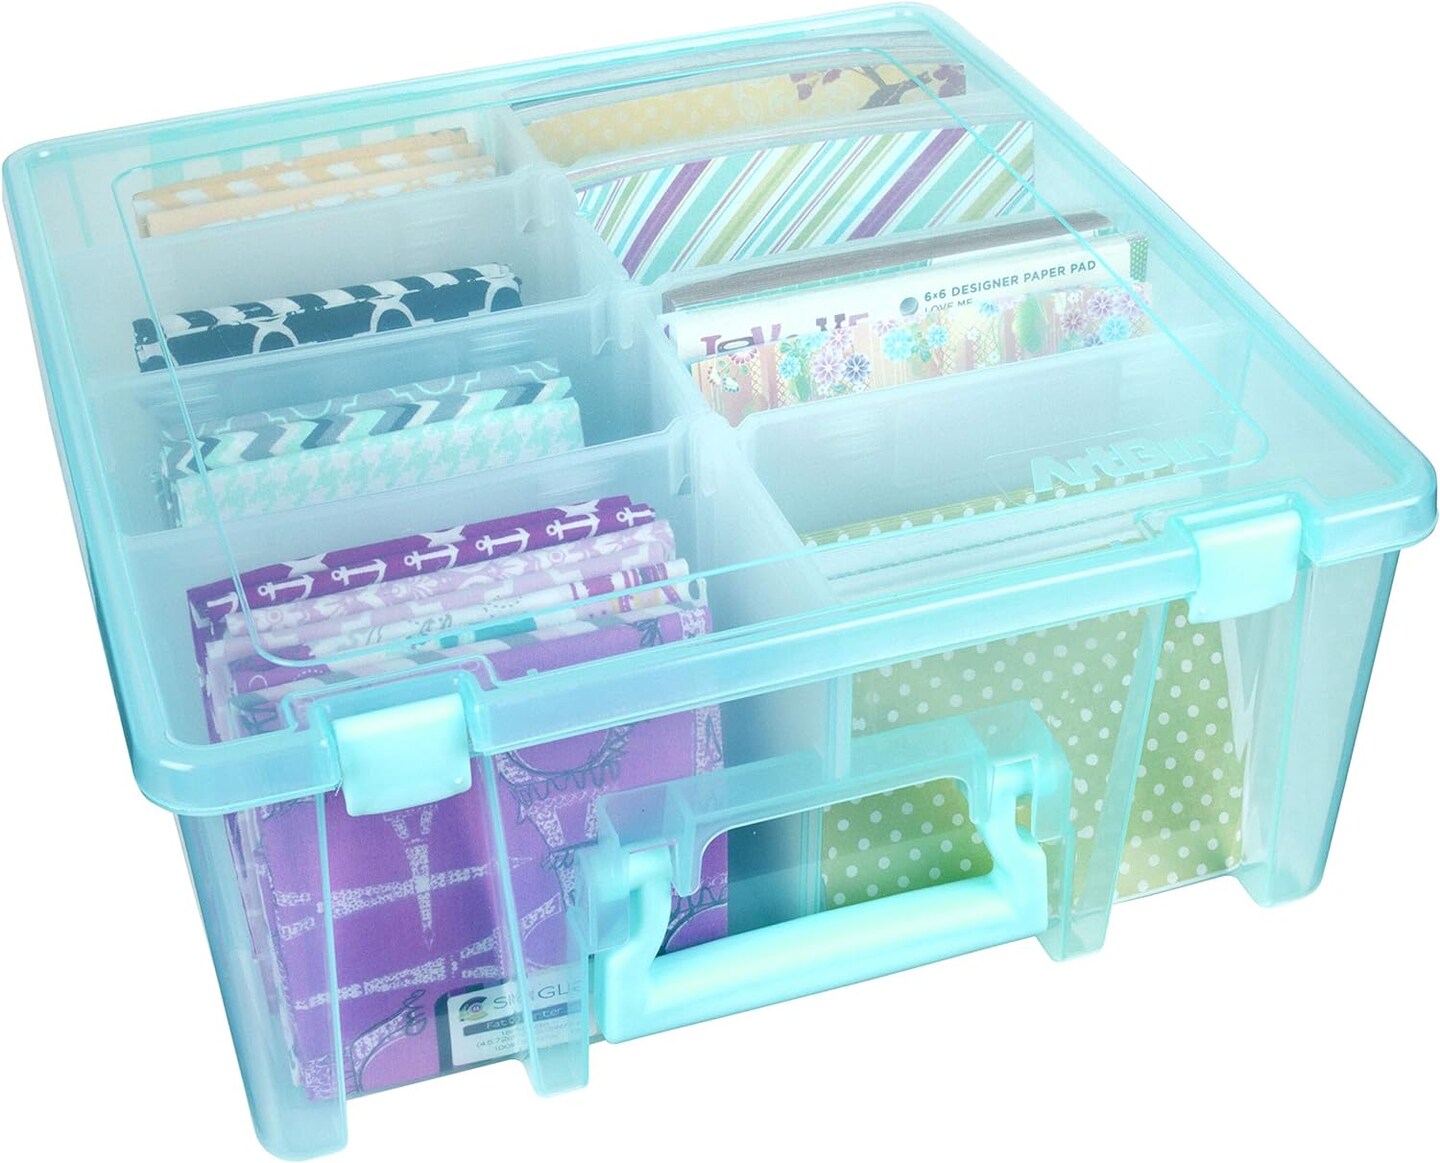 Portable Arts and Crafts Storage with Handle